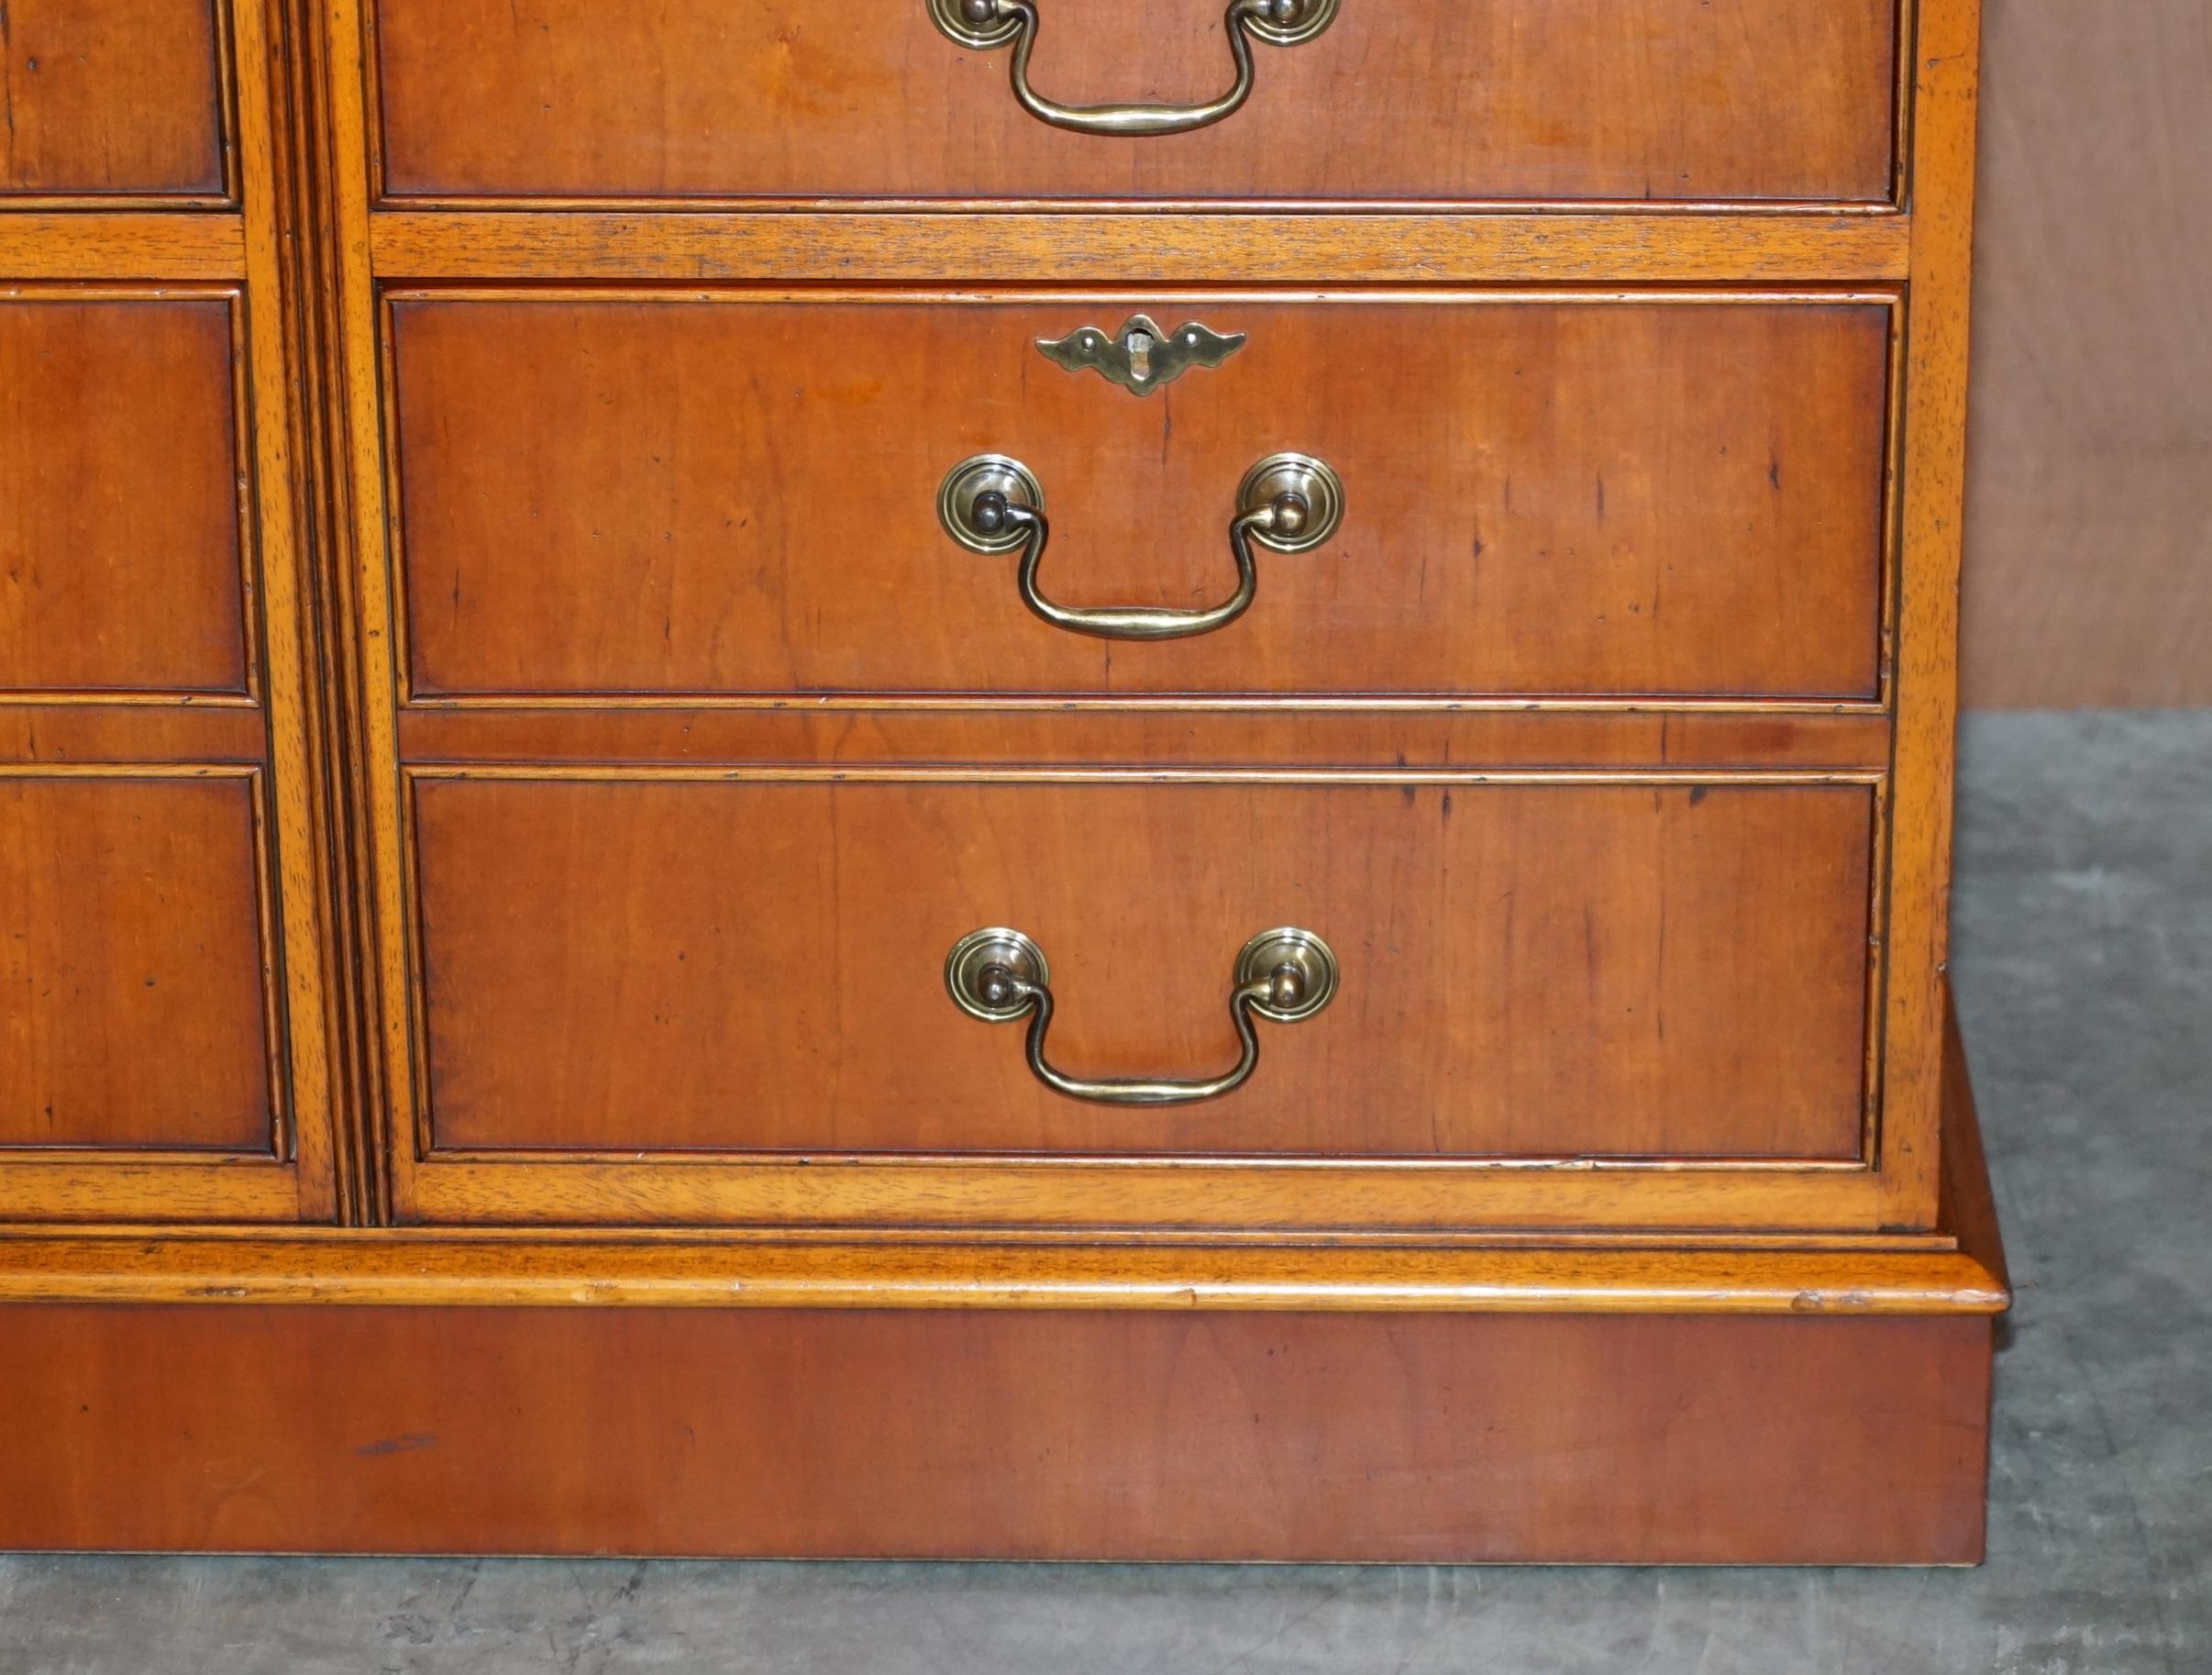 20th Century Stunning Yew Wood Brown Leather Double Filing Cabinet for at Home Office Study